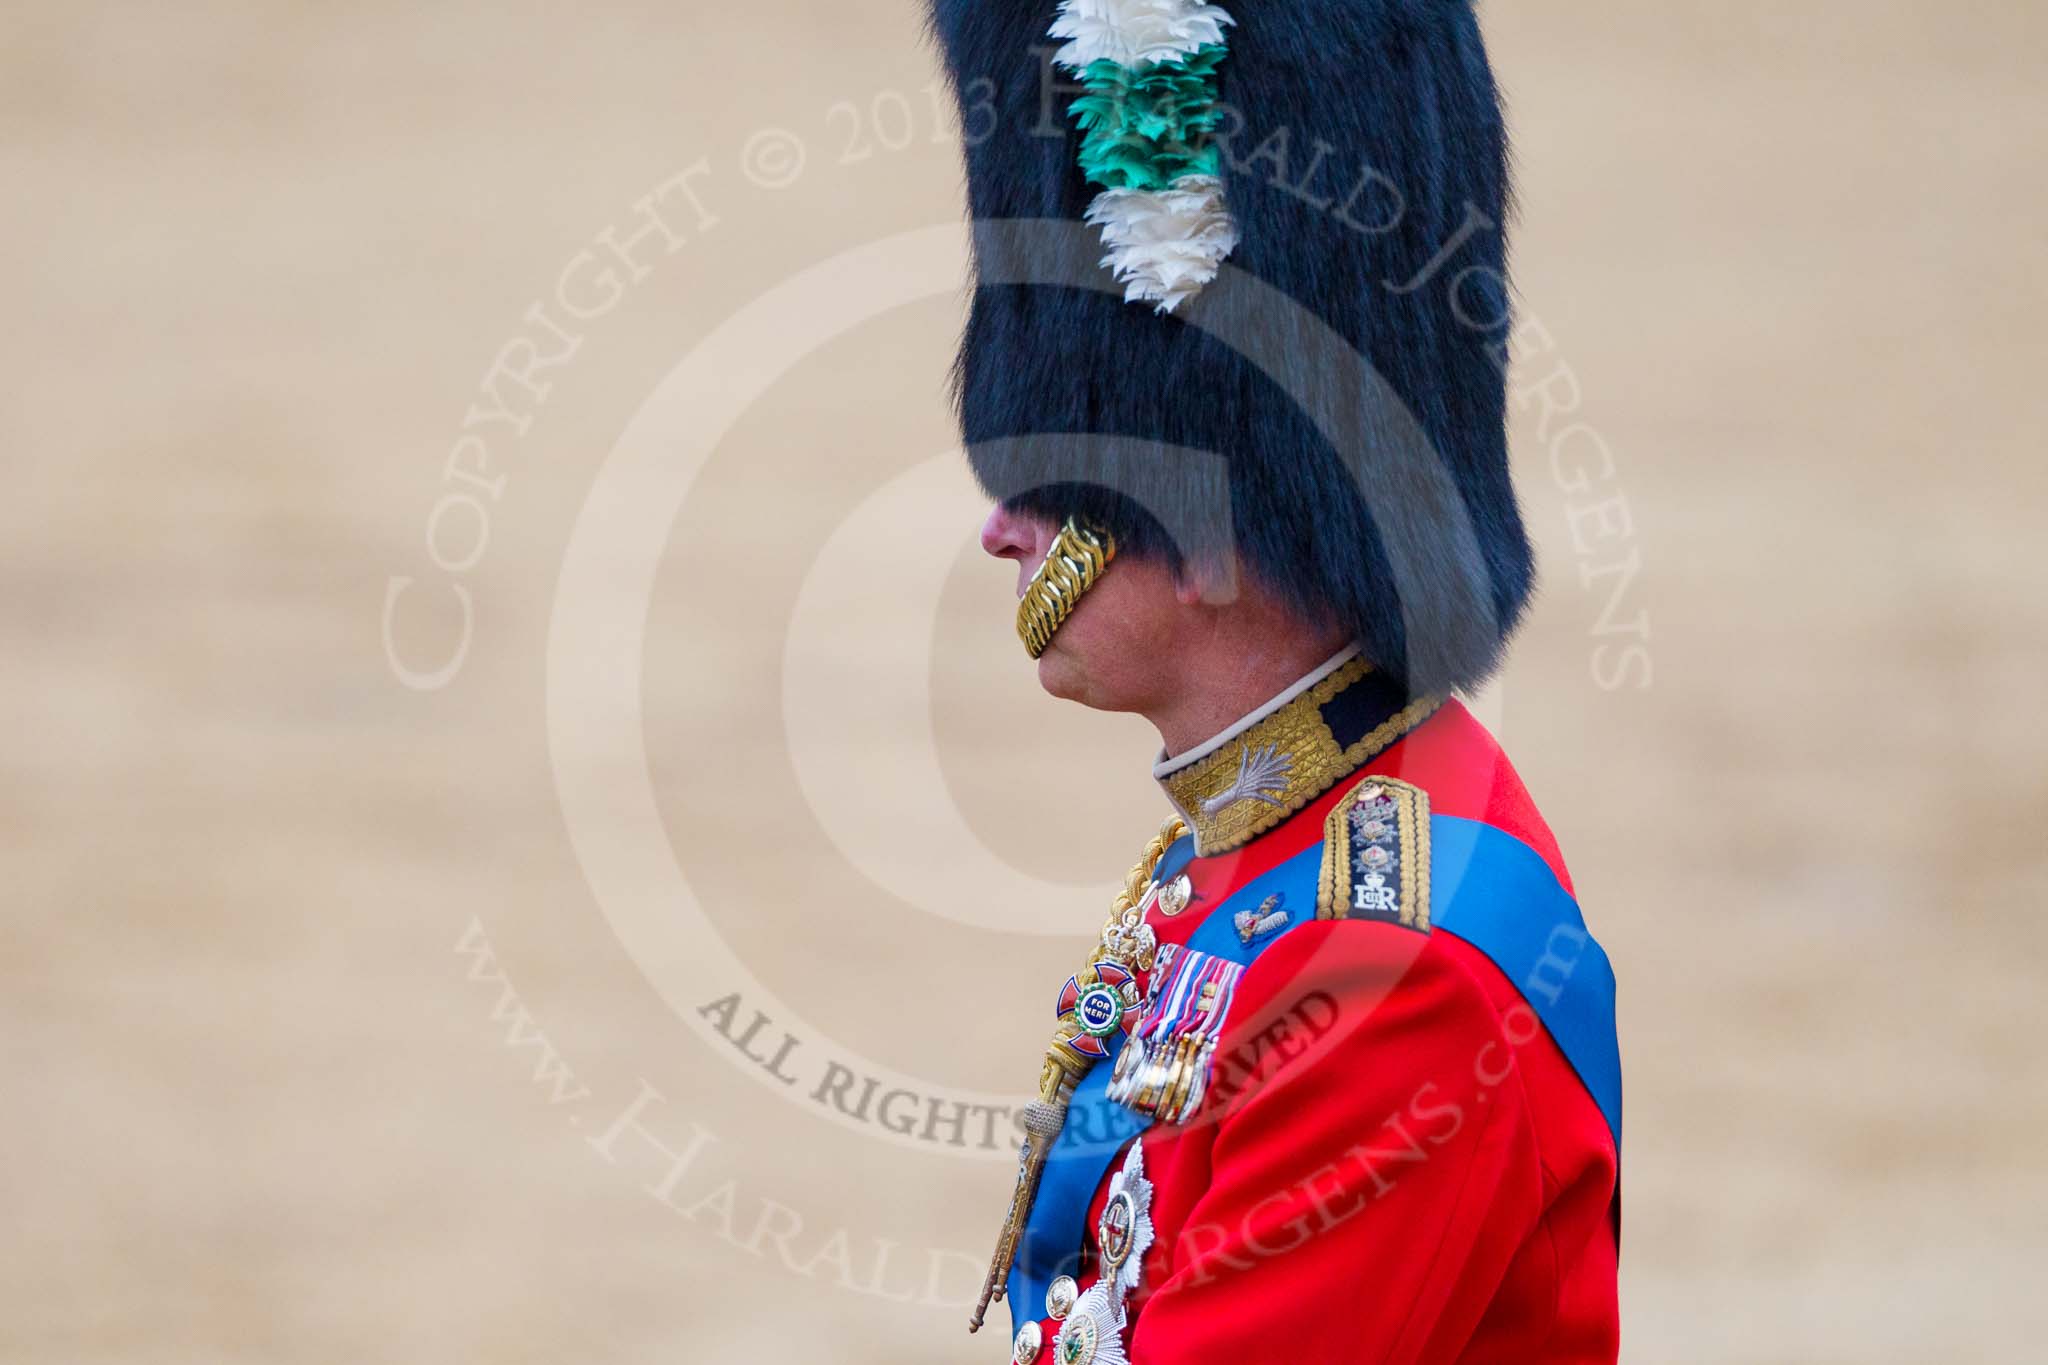 Trooping the Colour 2015. Image #659, 13 June 2015 12:09 Horse Guards Parade, London, UK